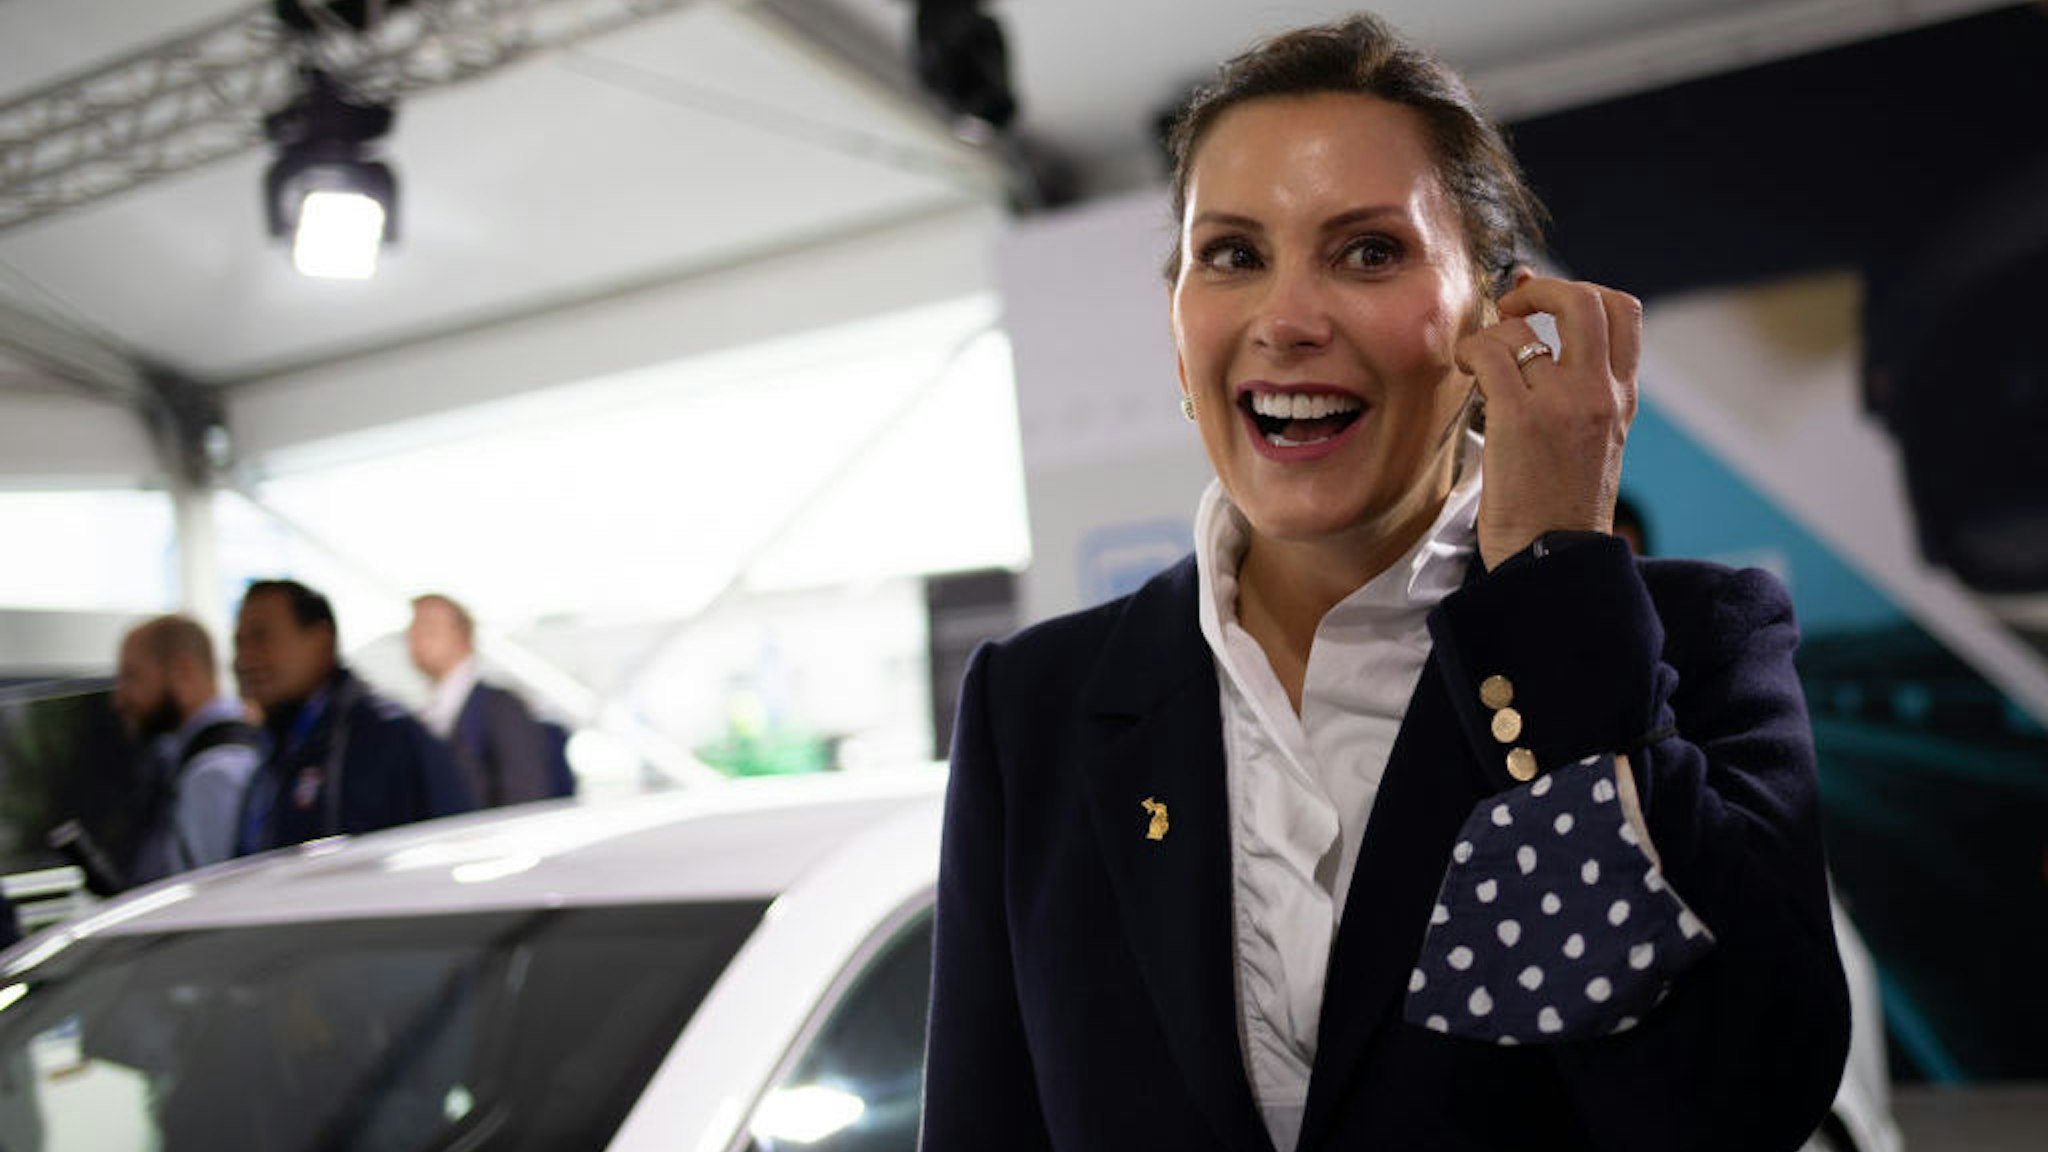 Gretchen Whitmer, governor of Michigan, during a tour of the Motor Bella Auto Show in Pontiac, Michigan, U.S., on Tuesday, Sept. 21, 2021. Motor Bella, a six-day experiential auto show, is making its debut at the M1 Concourse in Pontiac. Photographer: Emily Elconin/Bloomberg